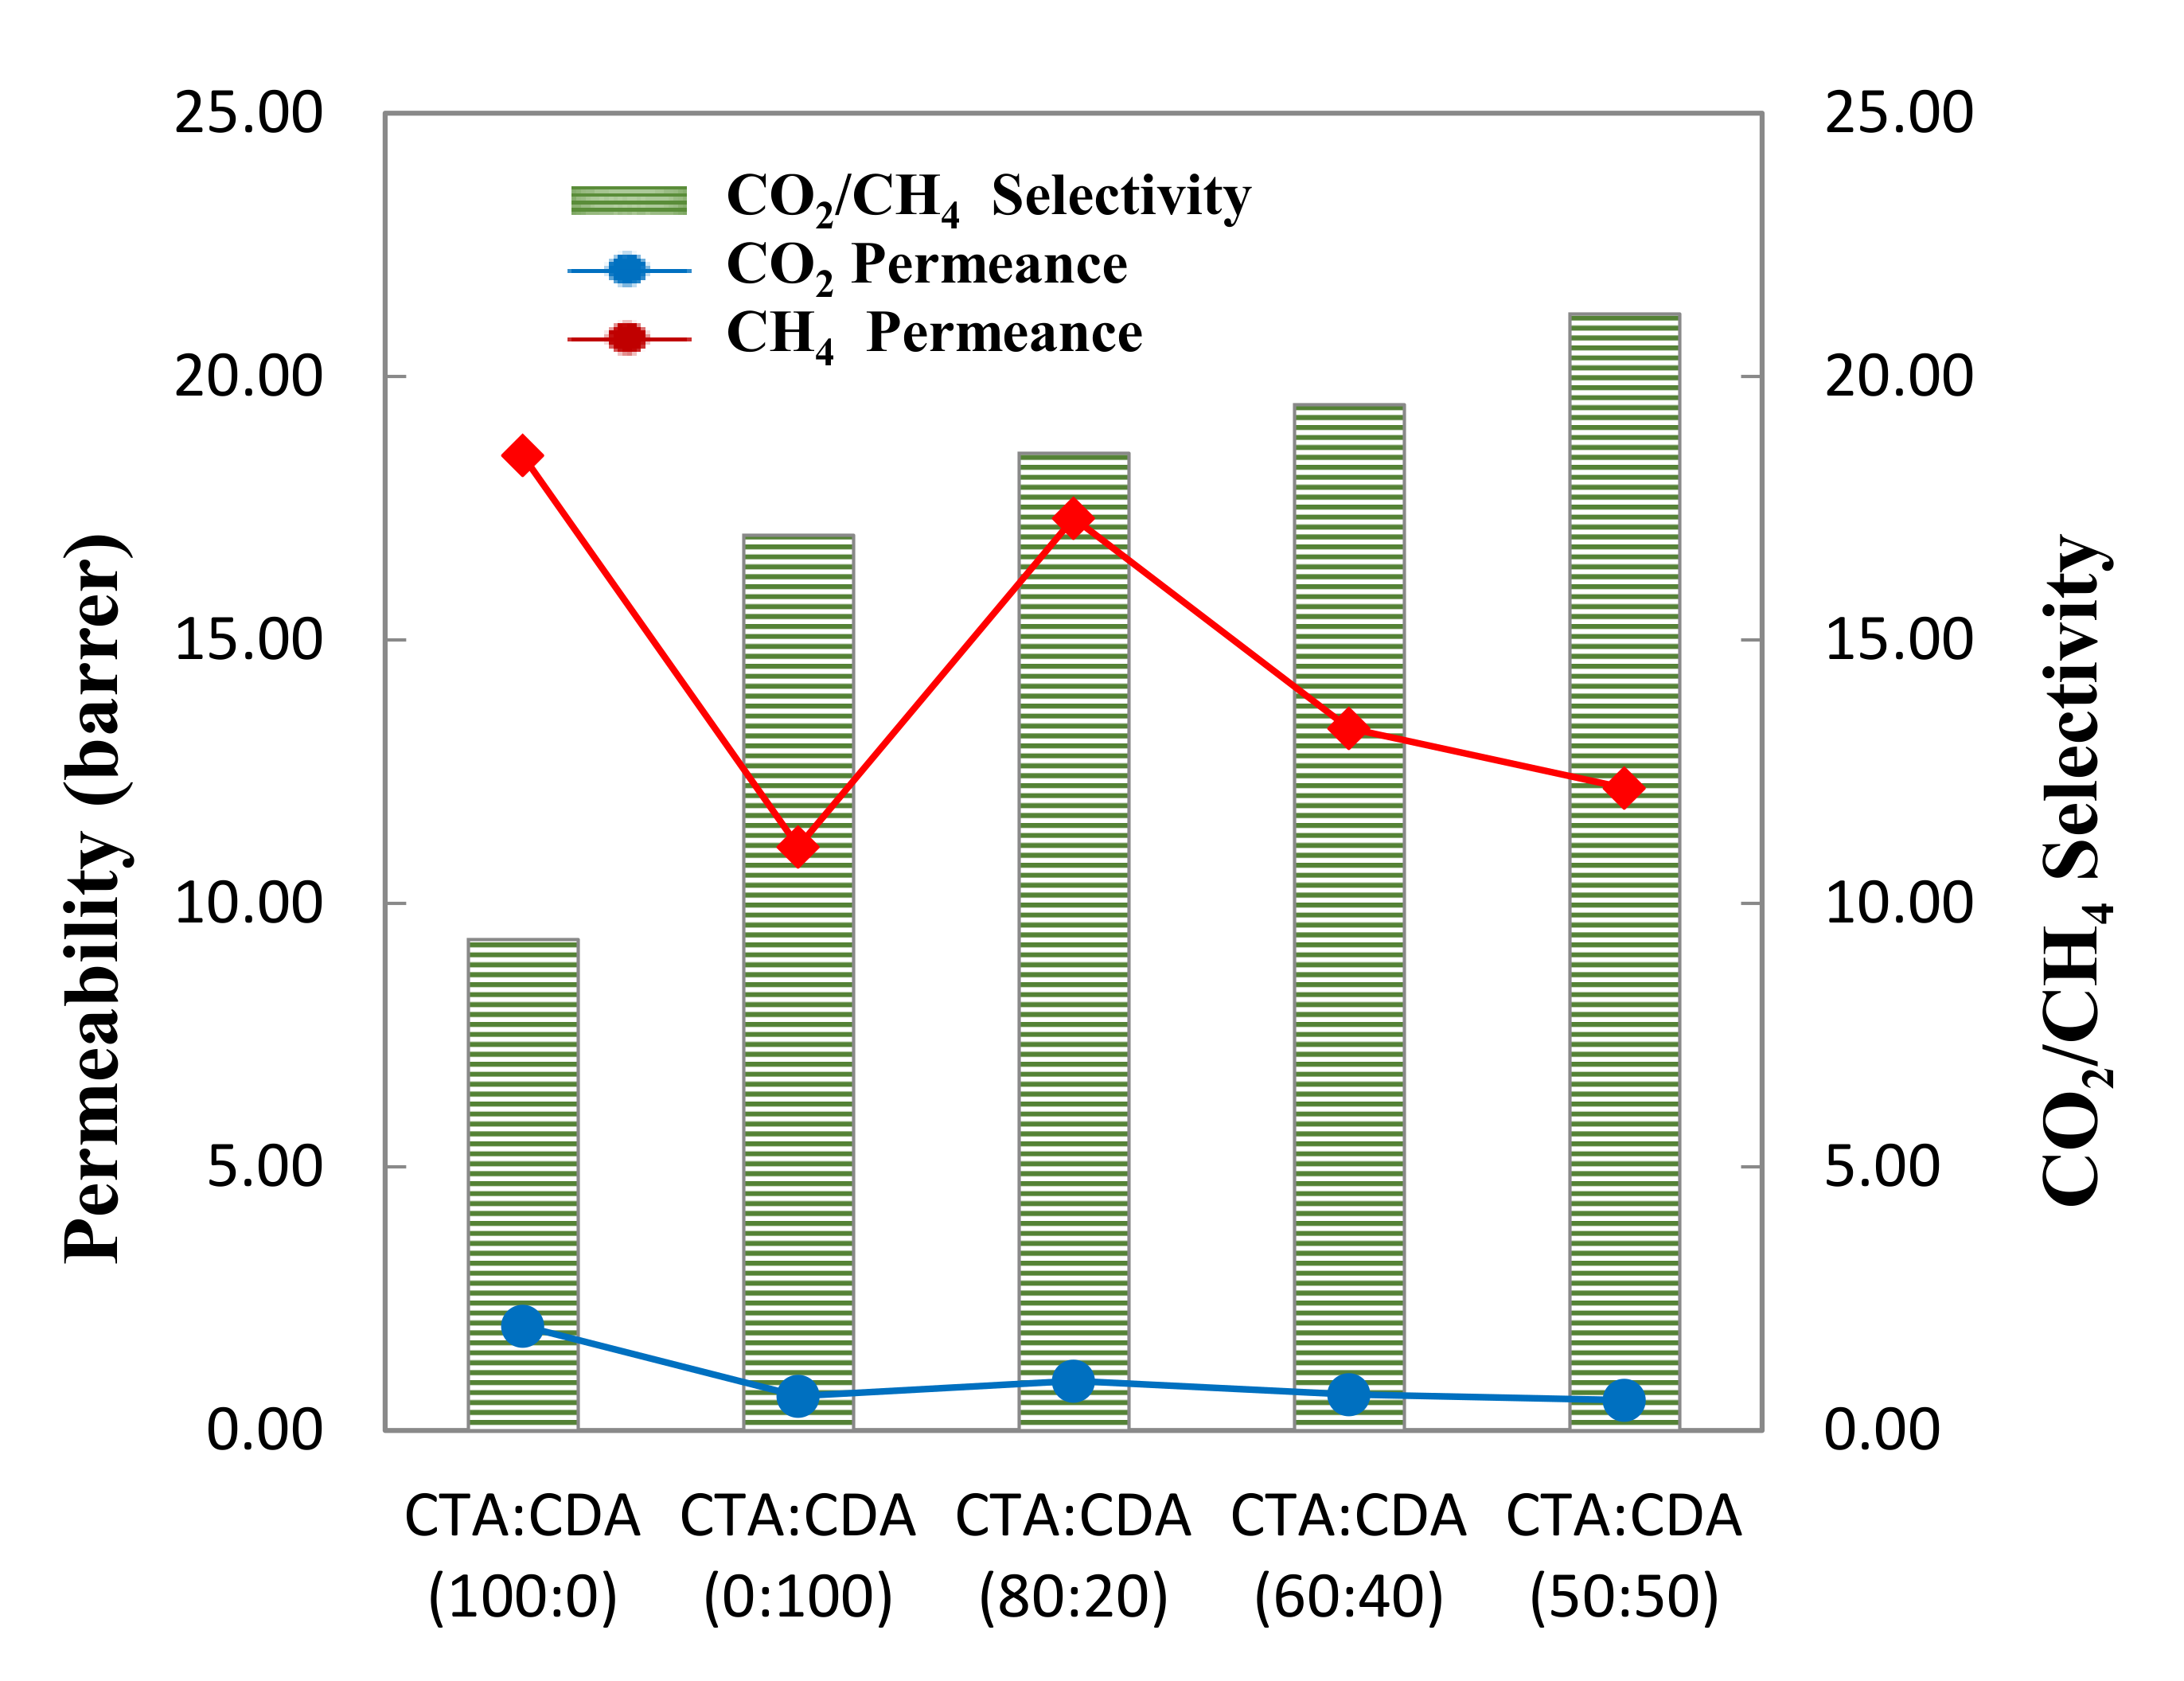 Membranes | Free Full-Text | Performance Analysis of Blended Membranes of Cellulose with Variable Degree of Acetylation for CO2/CH4 Separation